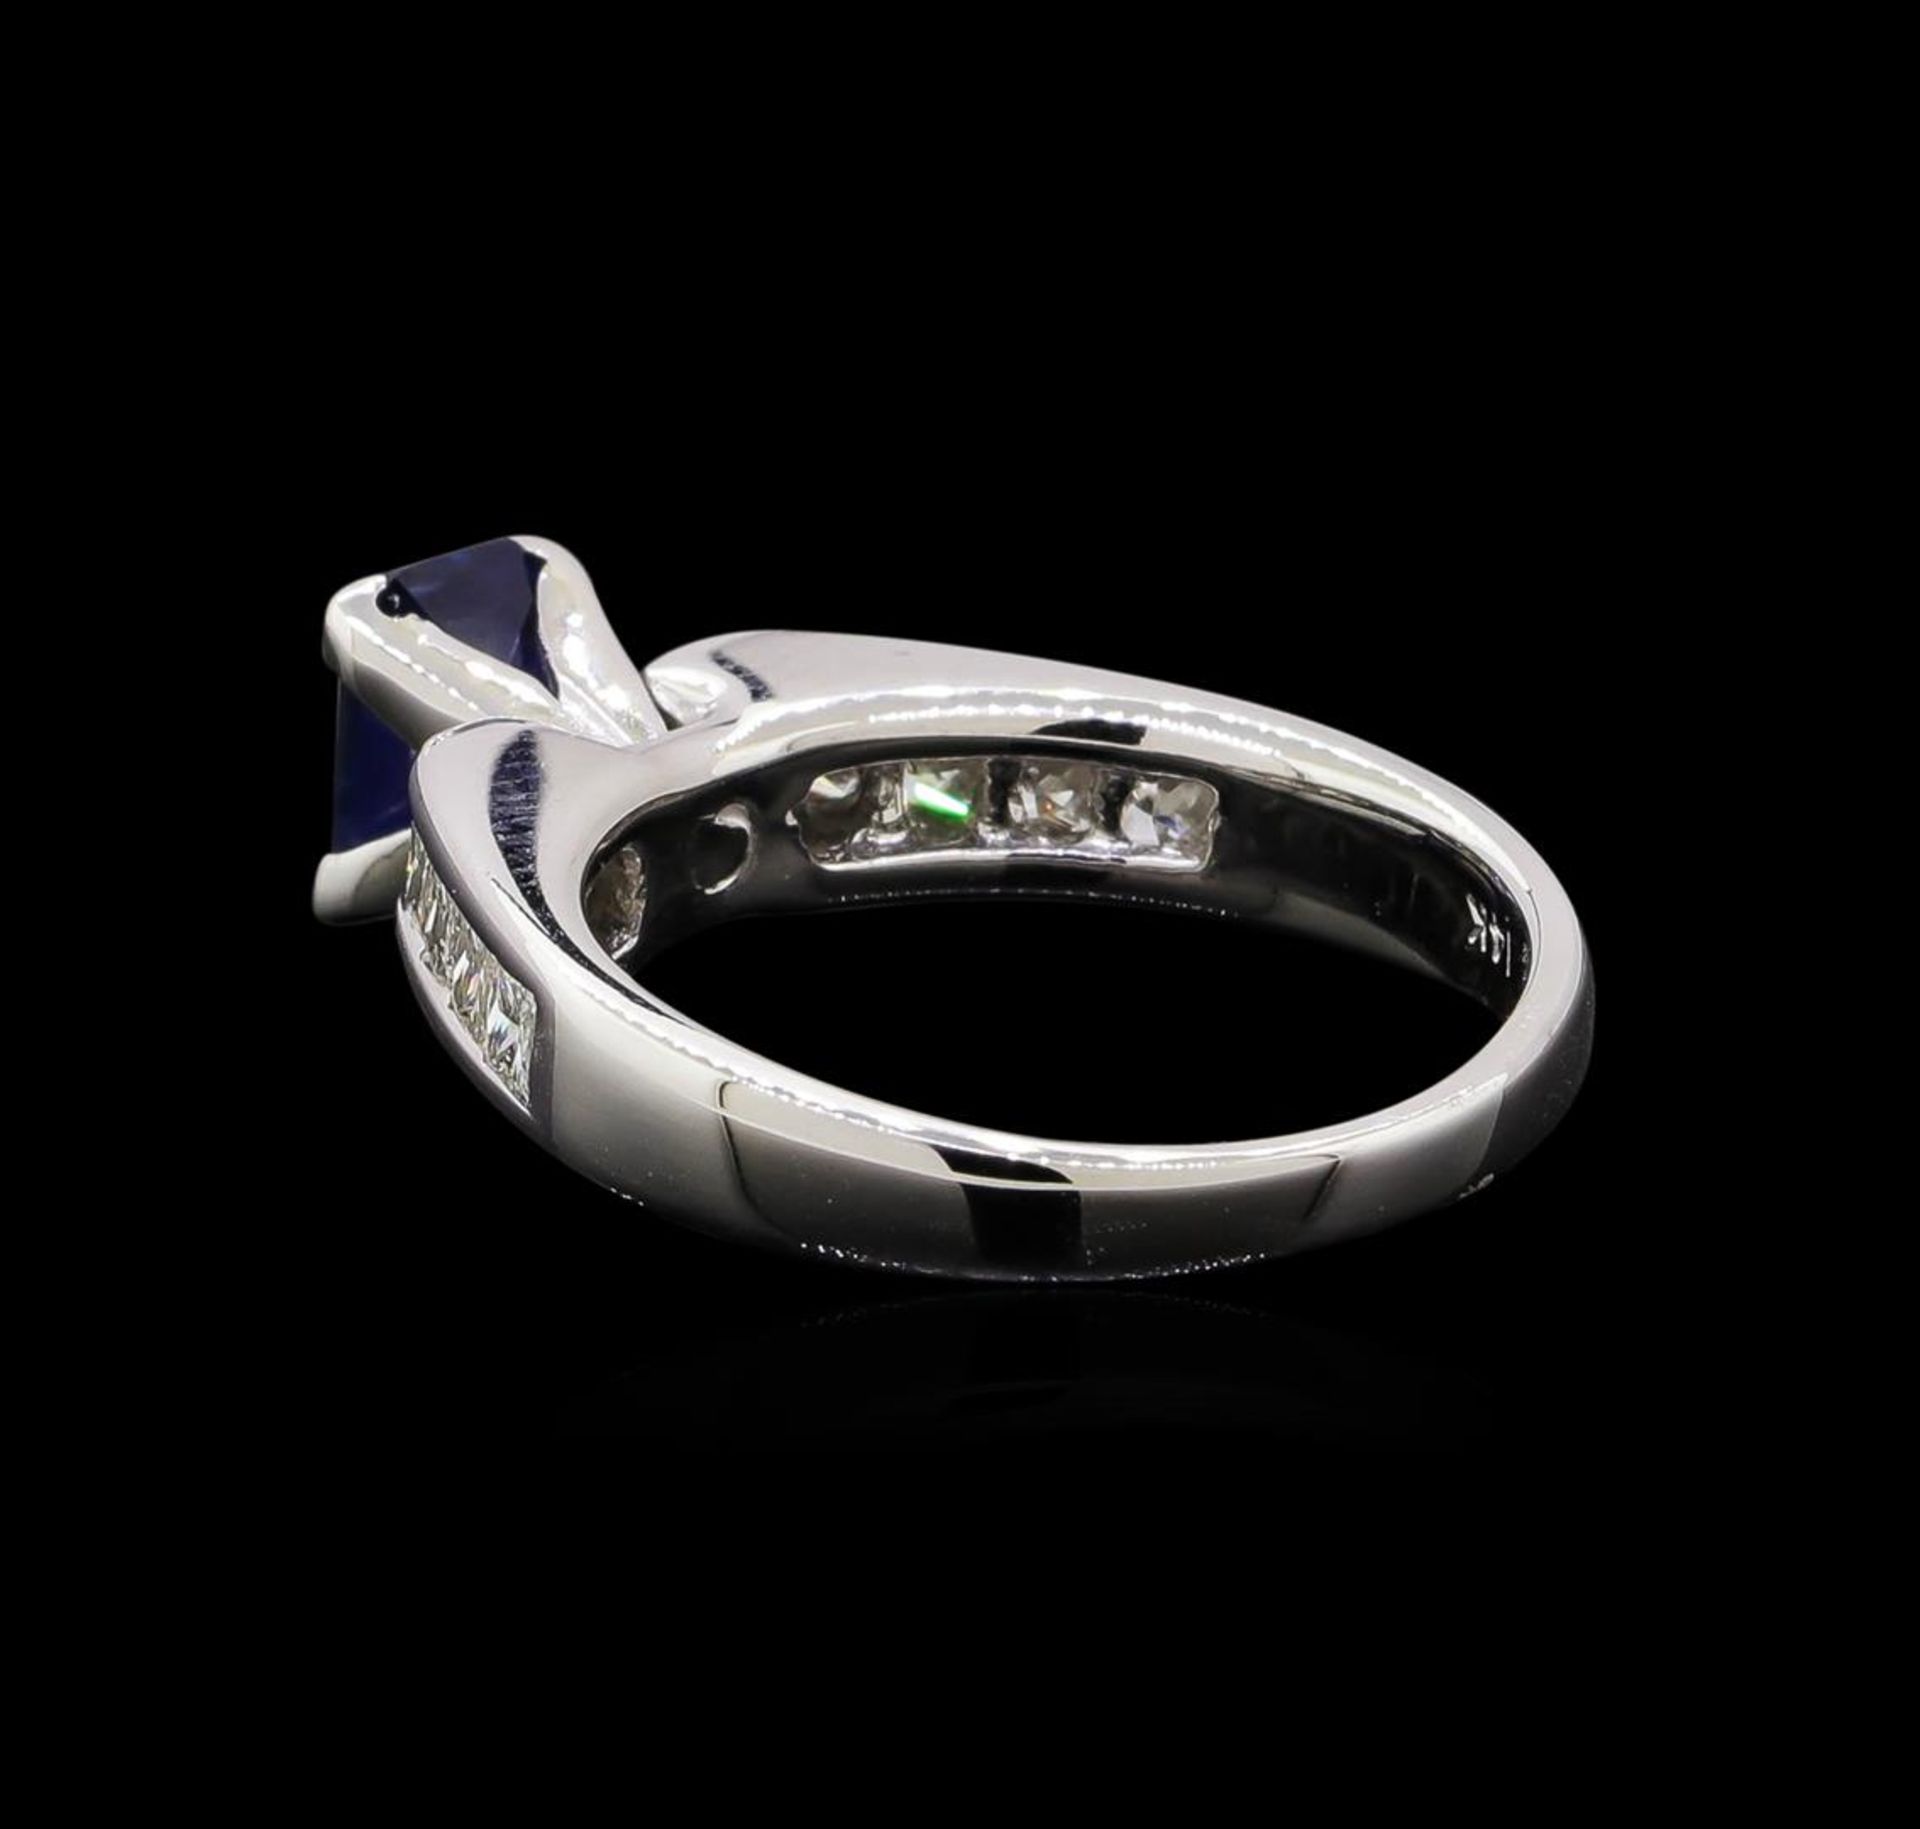 0.95 ctw Sapphire and Diamond Ring - 14KT White Gold - Image 3 of 4